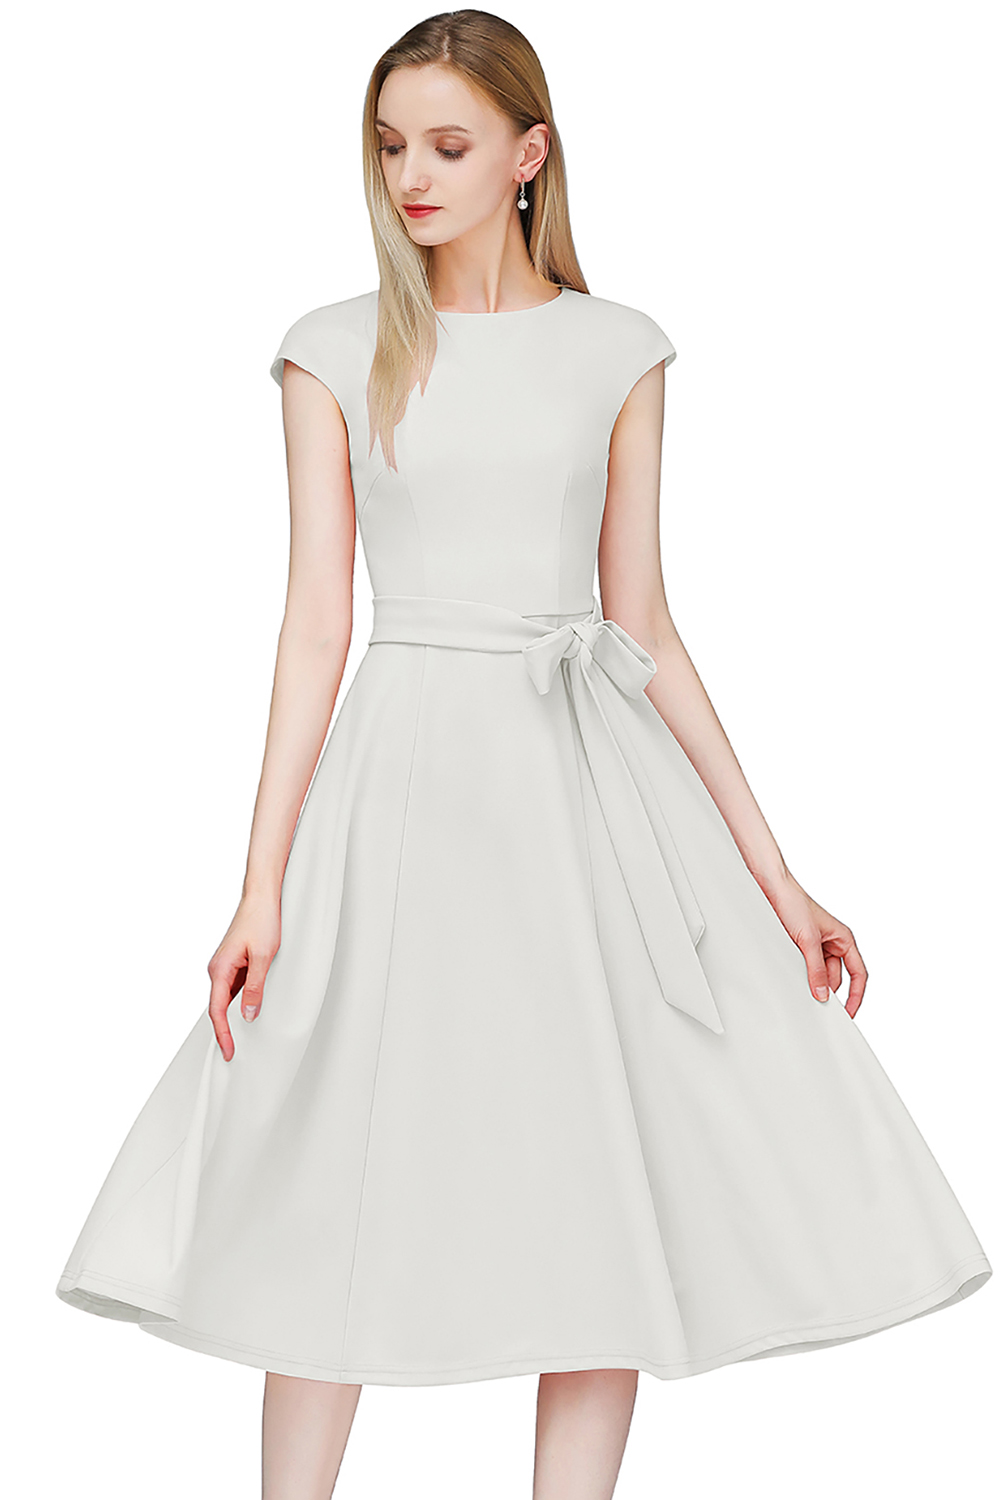 A-Line Knee-Length White Cocktail Dress with Cap Sleeves, Vintage Style, Unique and Elegant